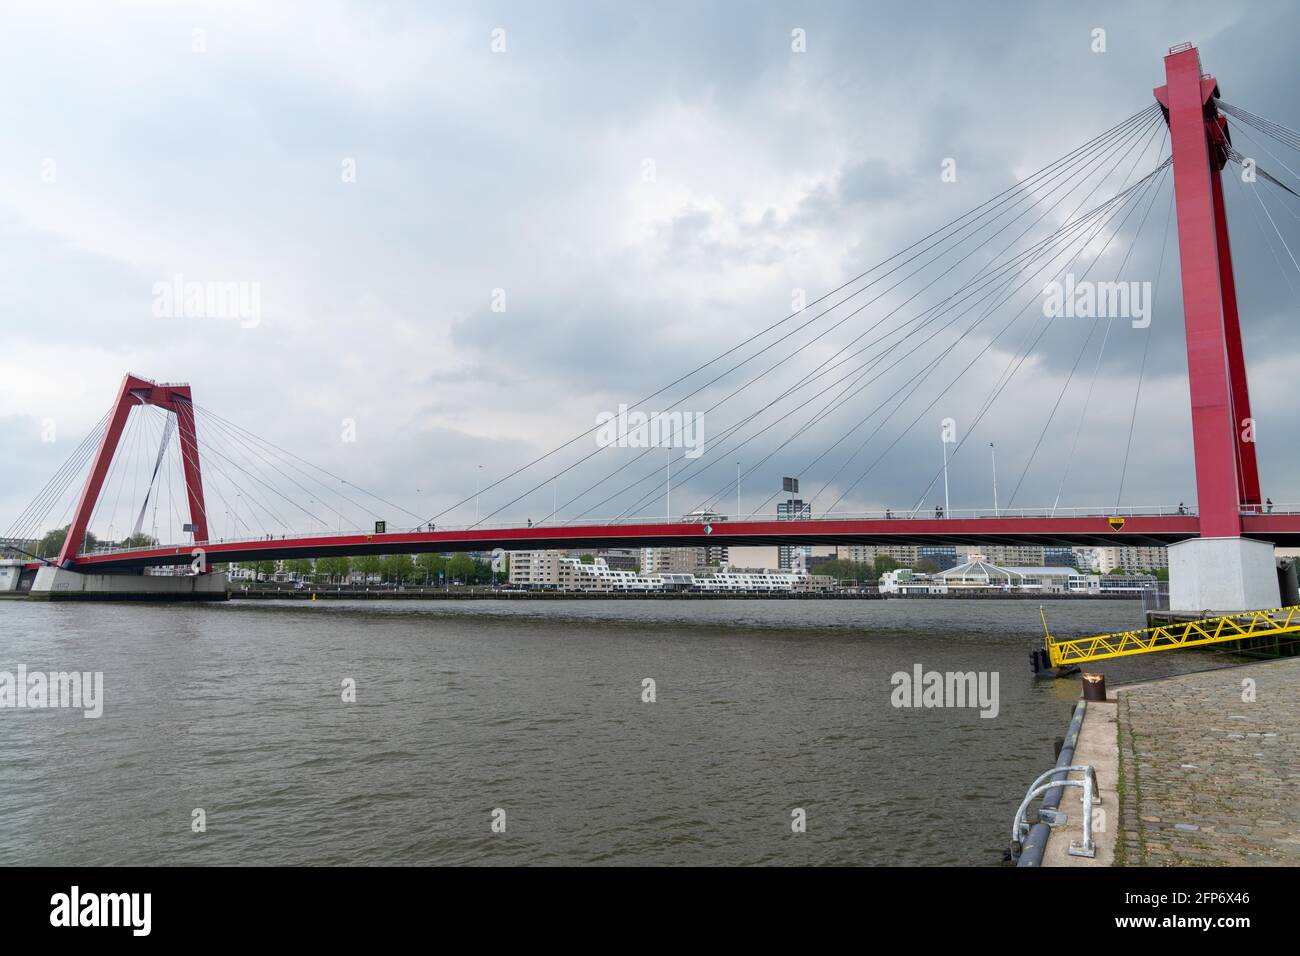 Rotterdam, Netherlands - 14 May, 2021: view of the Willemsbrug over the Nieuwe Maas River in downtown Rotterdam Stock Photo